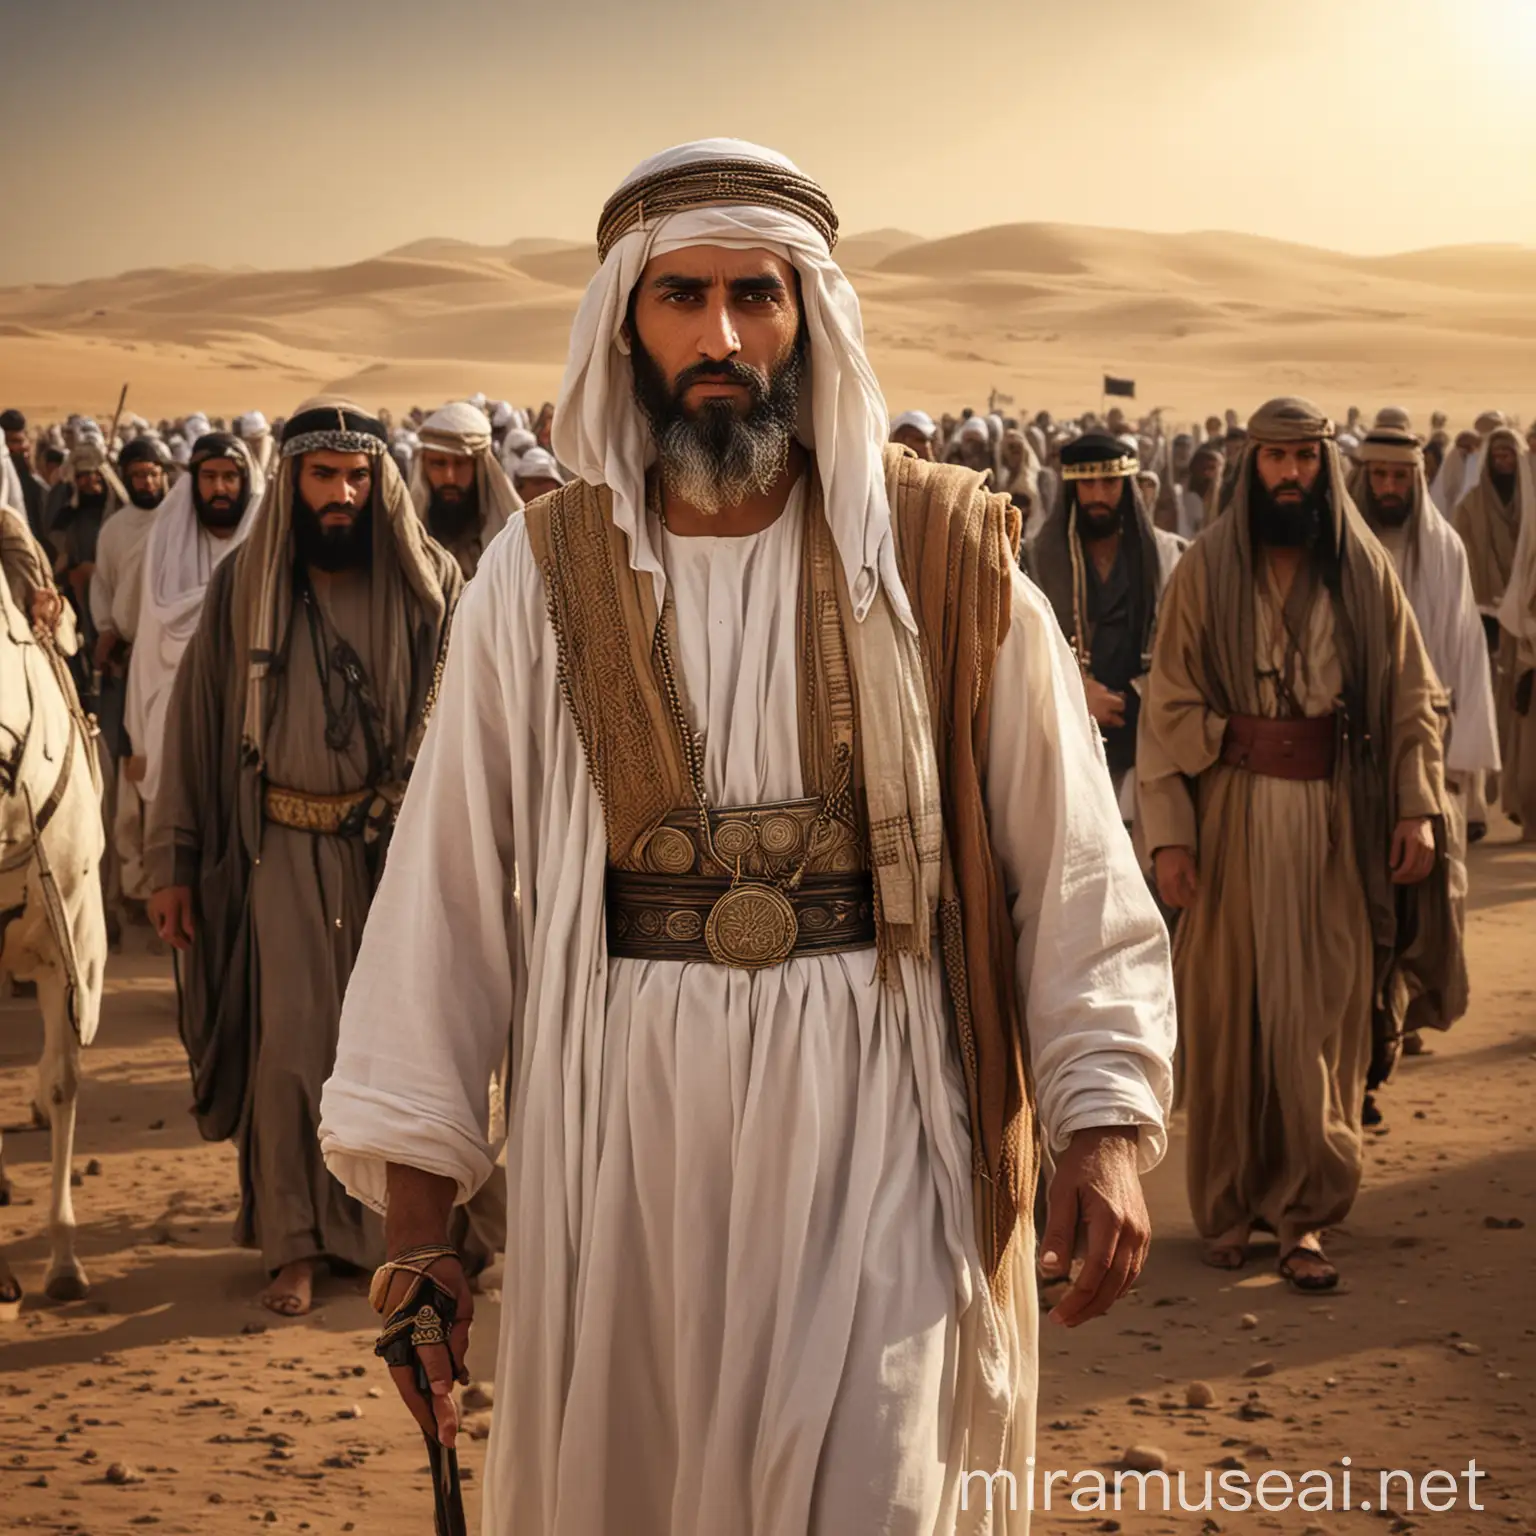 Arabian Man Leading His Follower in Ancient Middle East